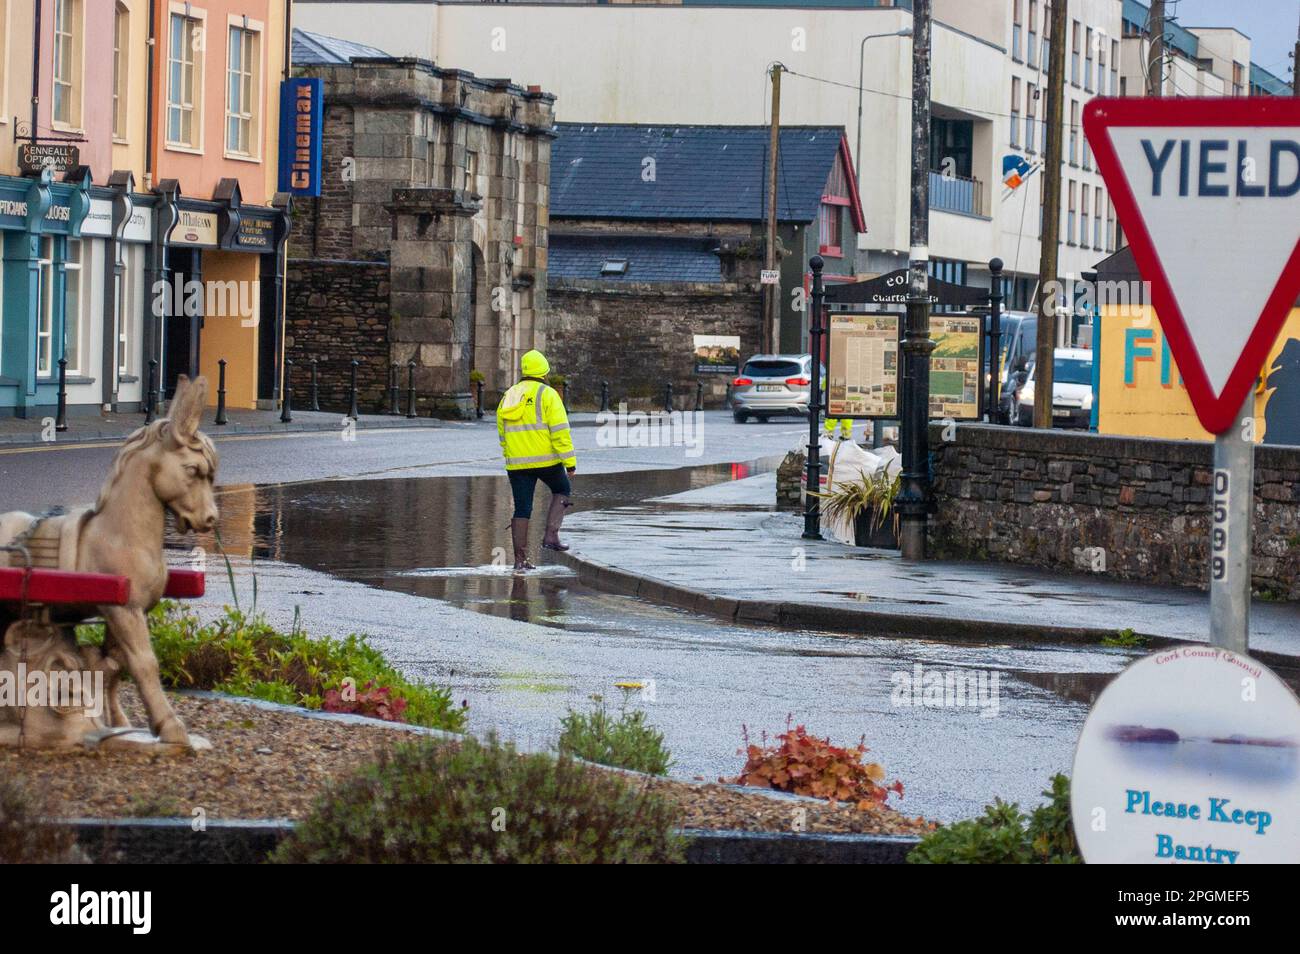 Bantry West Cork Ireland Thursday 23 Mar 2023; Bantry Experienced mild flooding this evening. High tide hit at 6.05pm with spot flooding in places. Cork County Council staff where out dealing with the major waterlogged areas as well as traffic managment. Credit; ED/Alamy Live News Stock Photo